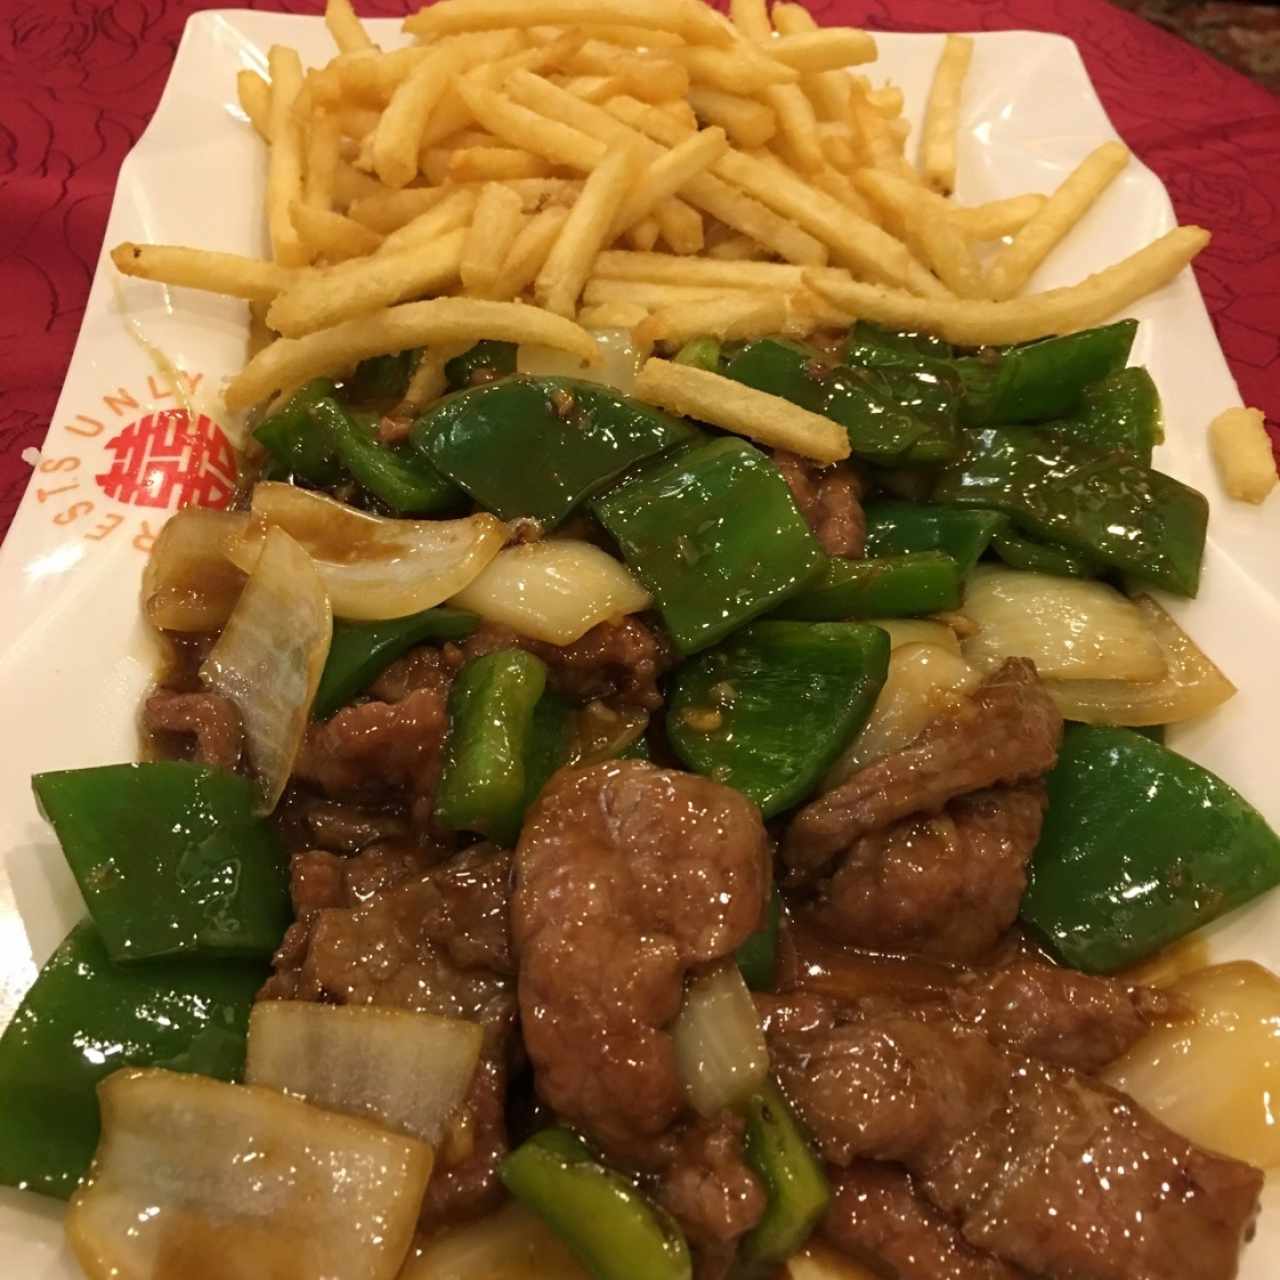 Pepper steak with fries